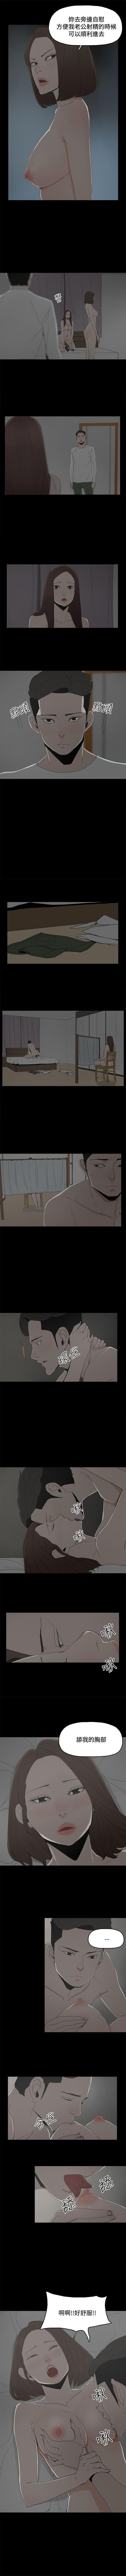 Lolicon 代理孕母 18 [Chinese] Manhwa Ameture Porn - Page 5